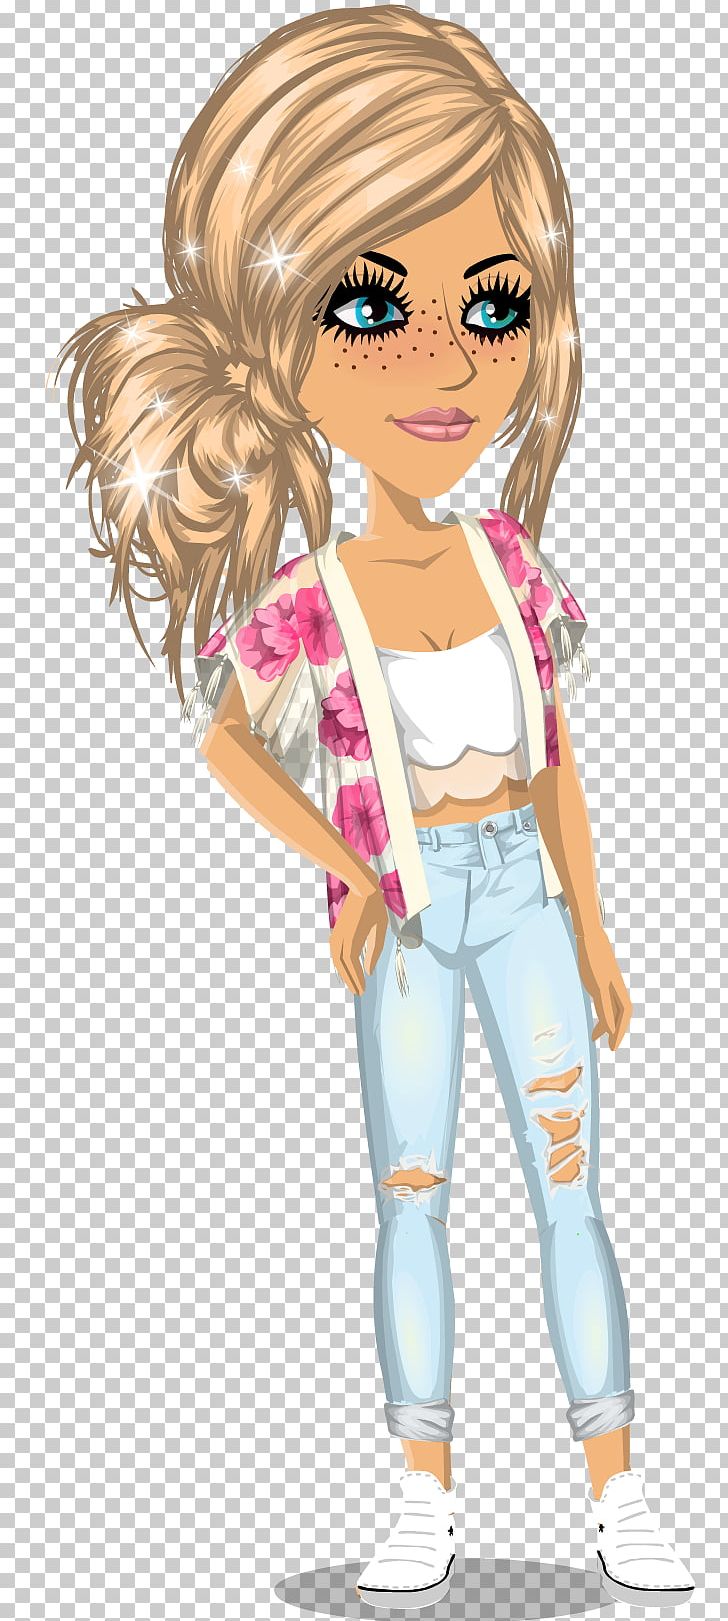 MovieStarPlanet Drawing Art Video PNG, Clipart, Andro, Animation, Anime, Art, Artist Free PNG Download